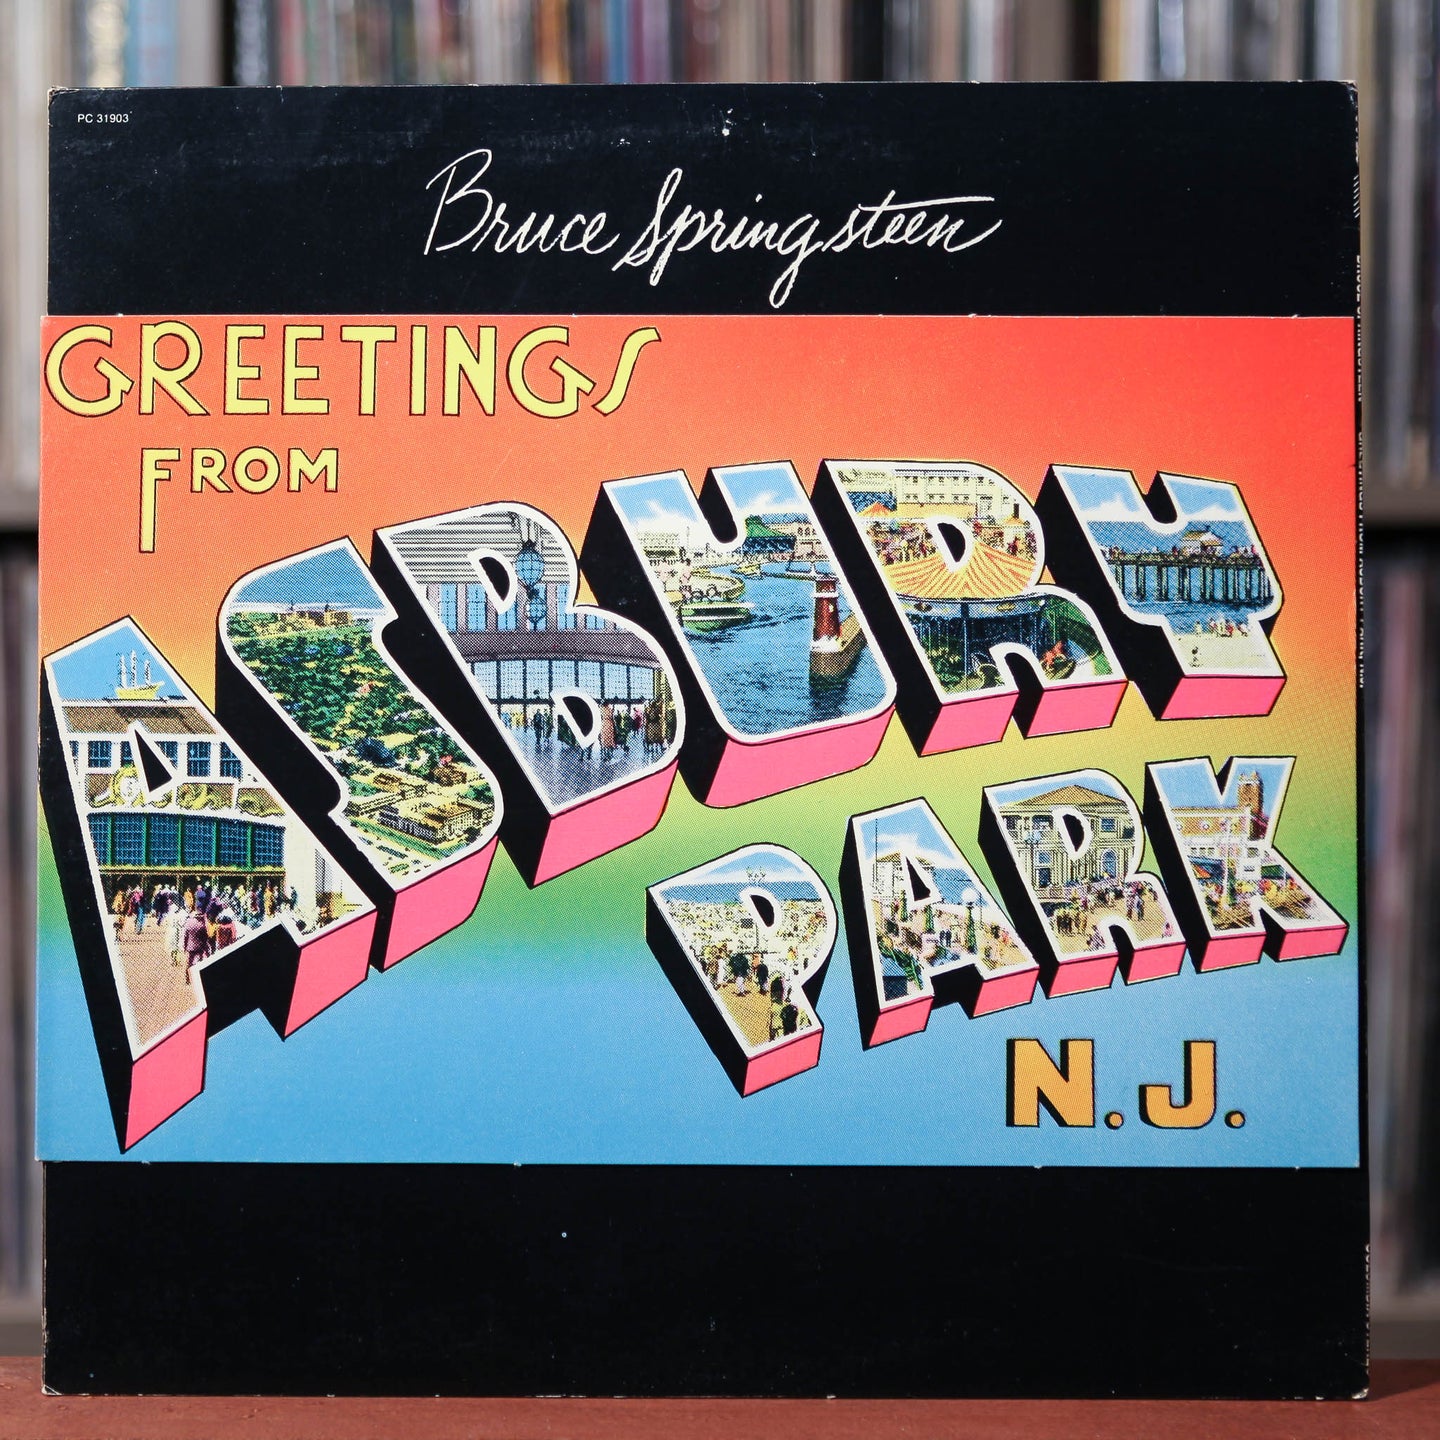 Bruce Springsteen - Greetings From Asbury Park  - 1973 Columbia, EX/VG+